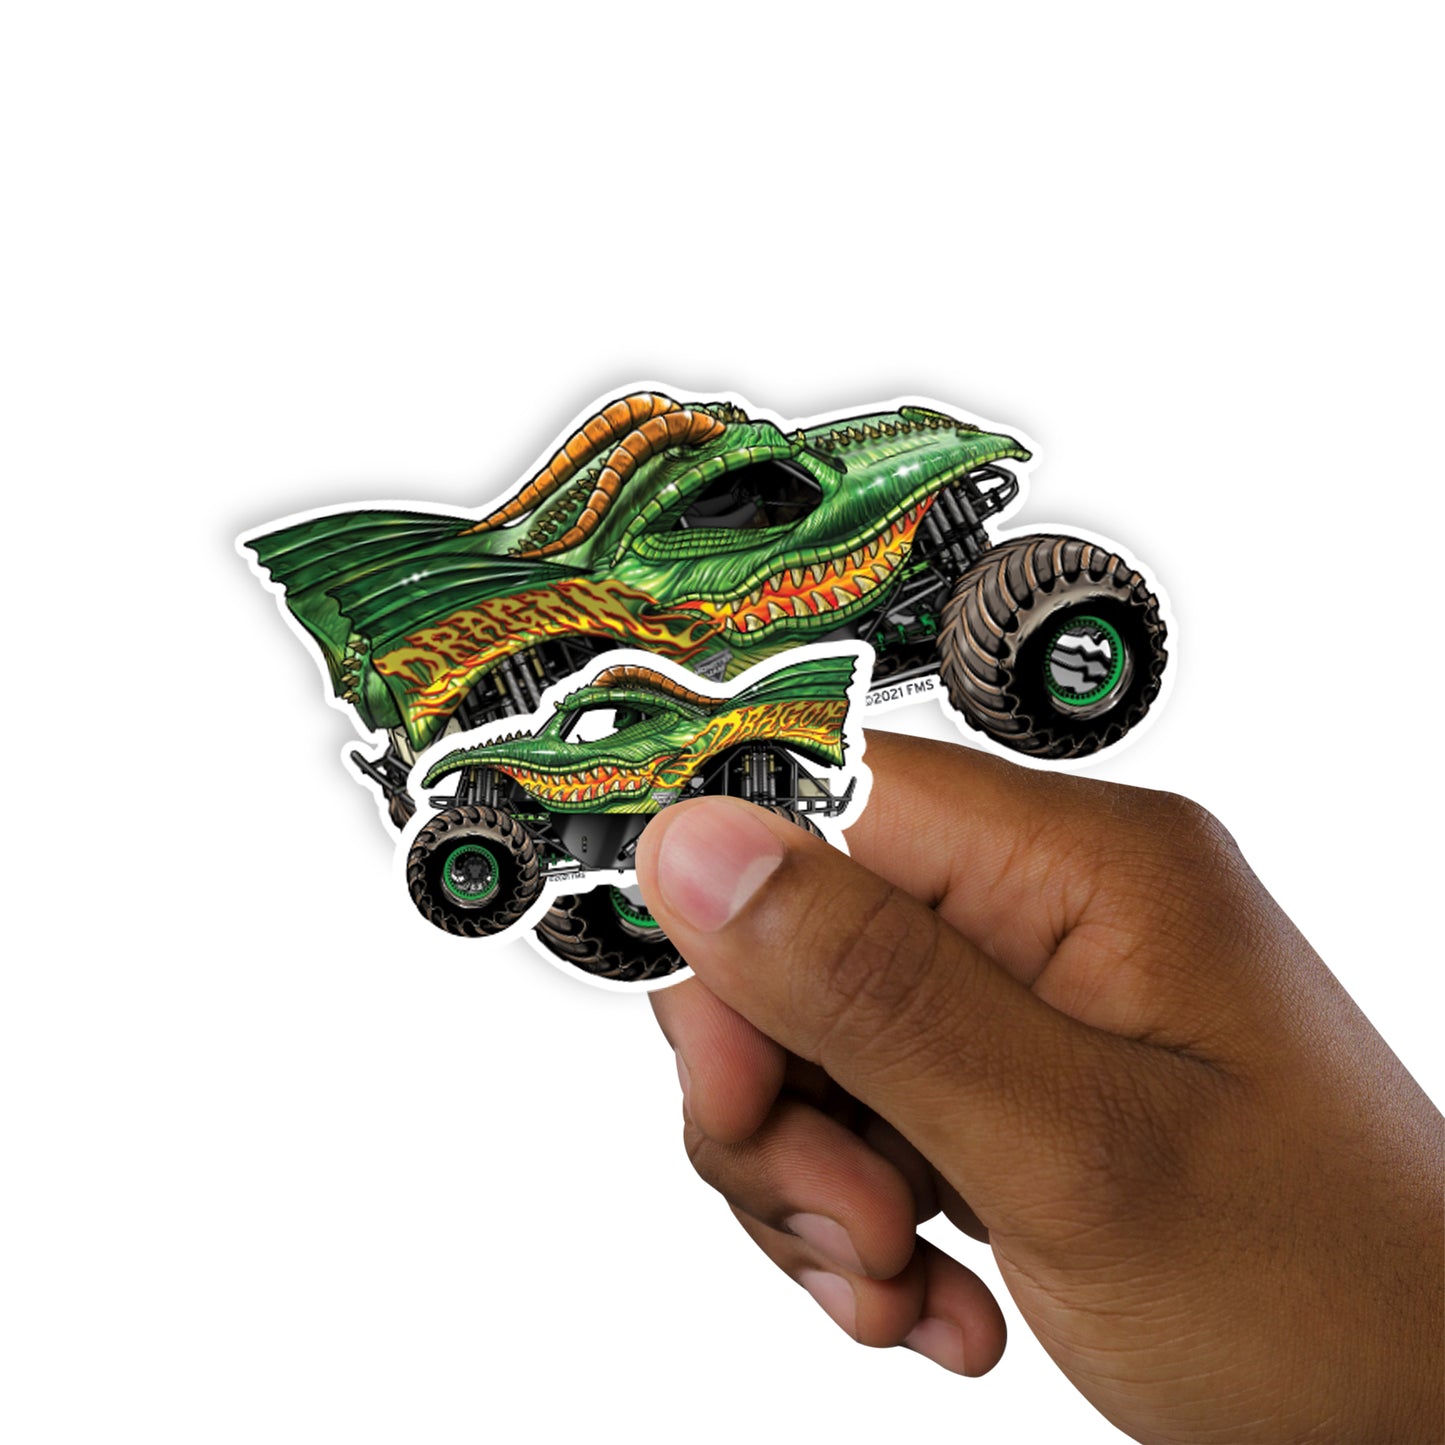 Sheet of 5 -Dragon Minis        - Officially Licensed Monster Jam Removable     Adhesive Decal